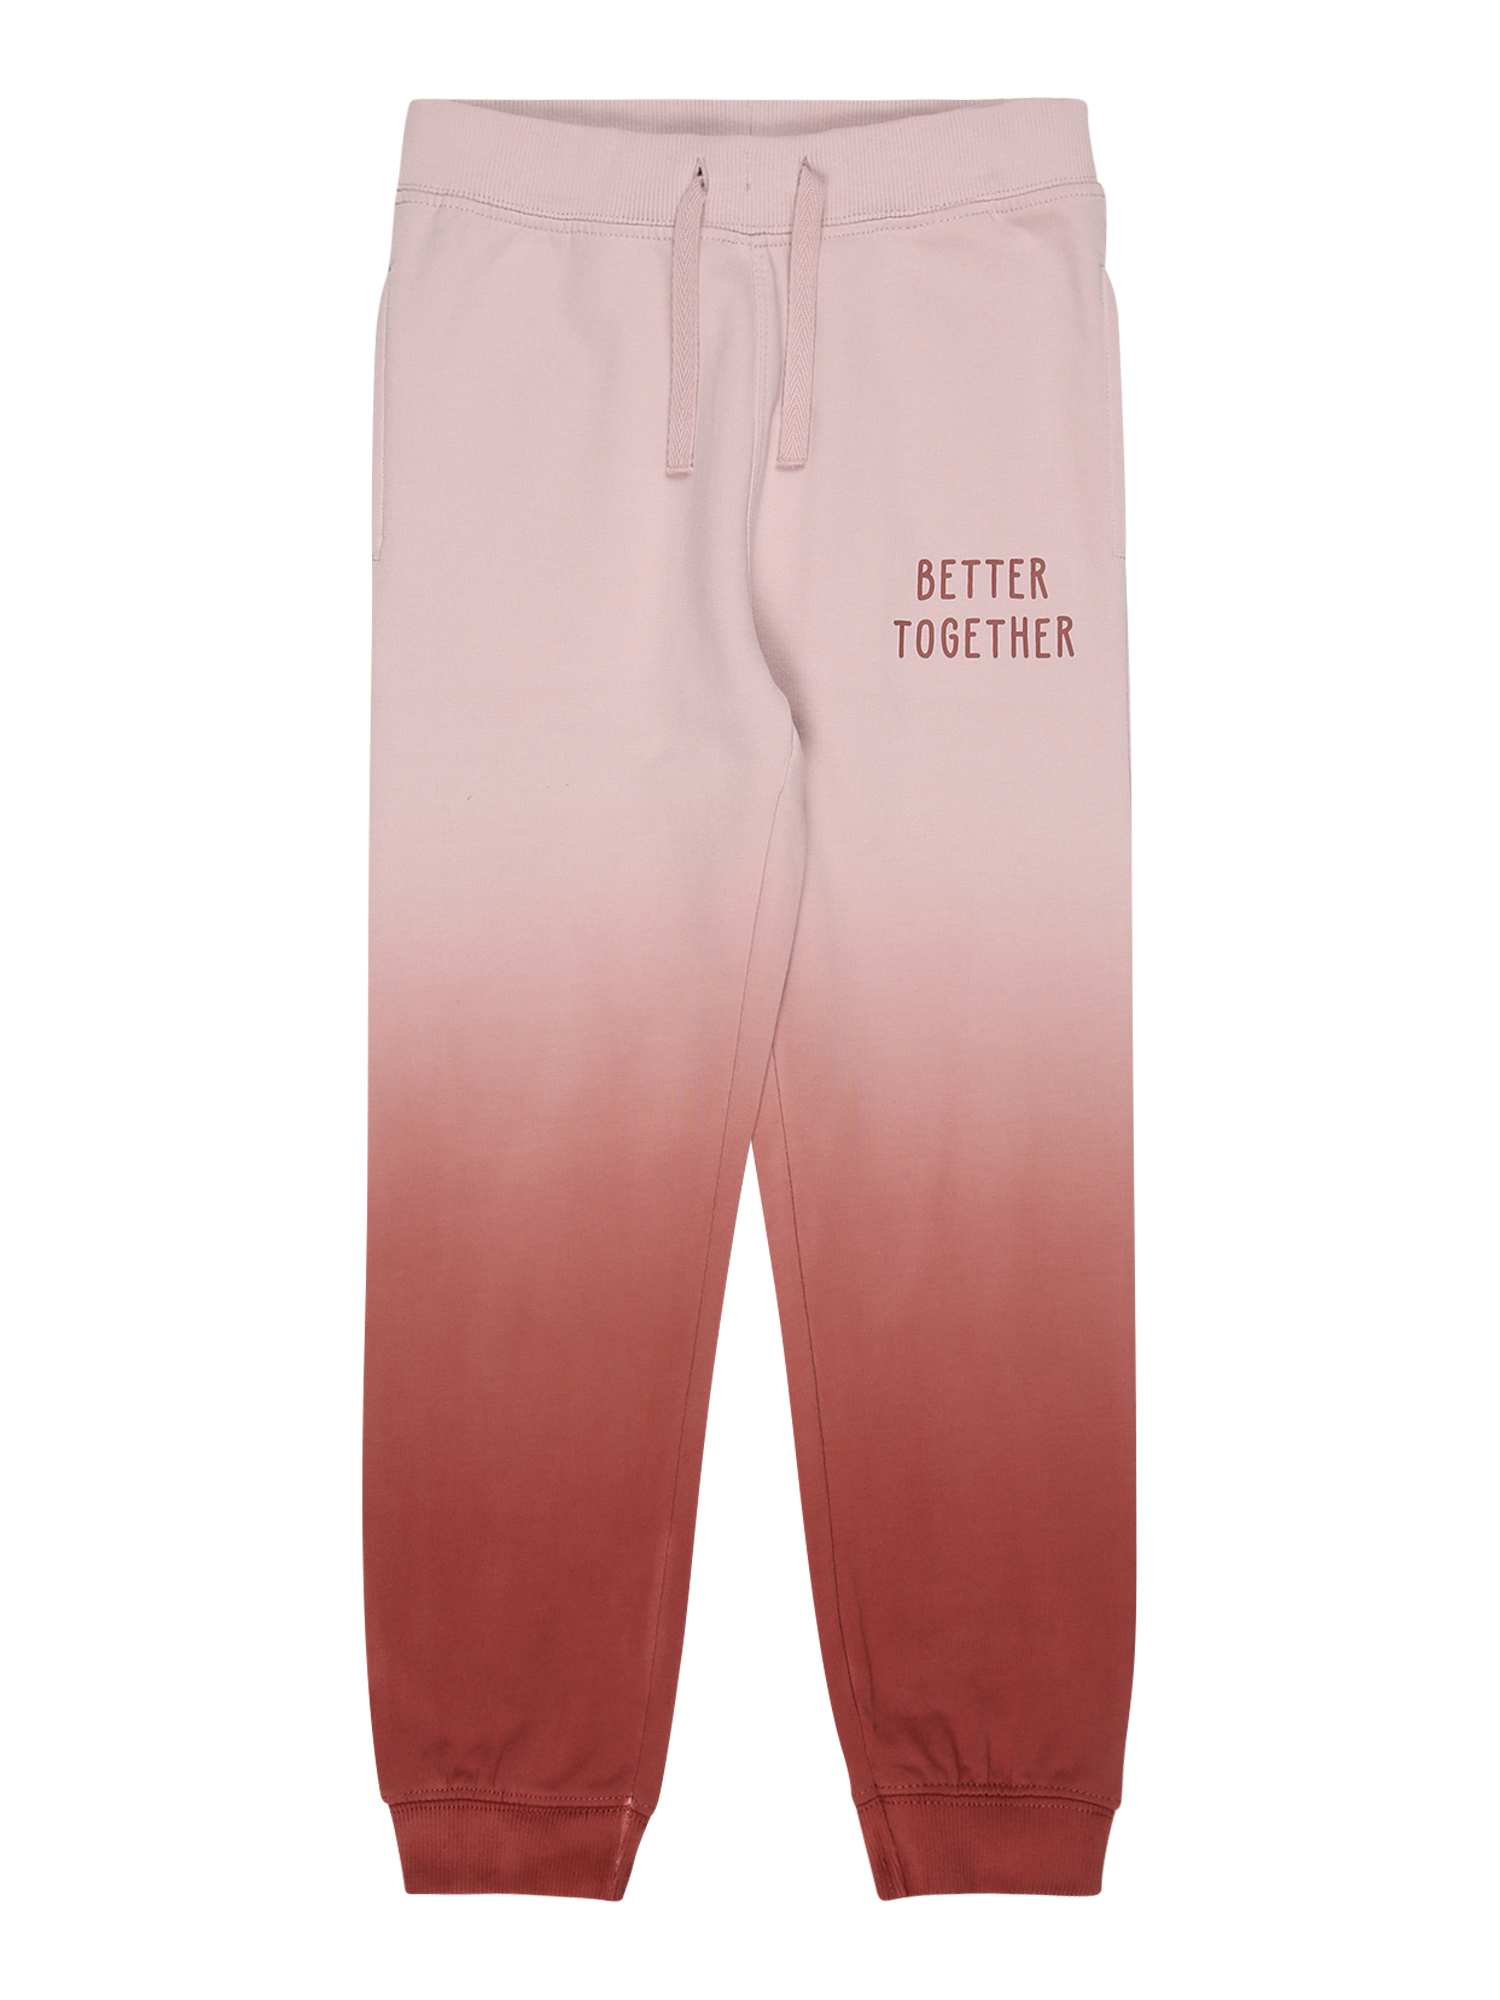 NAME IT Pantaloni BETTER TOGETHER in Rosso Pastello, Rosa 